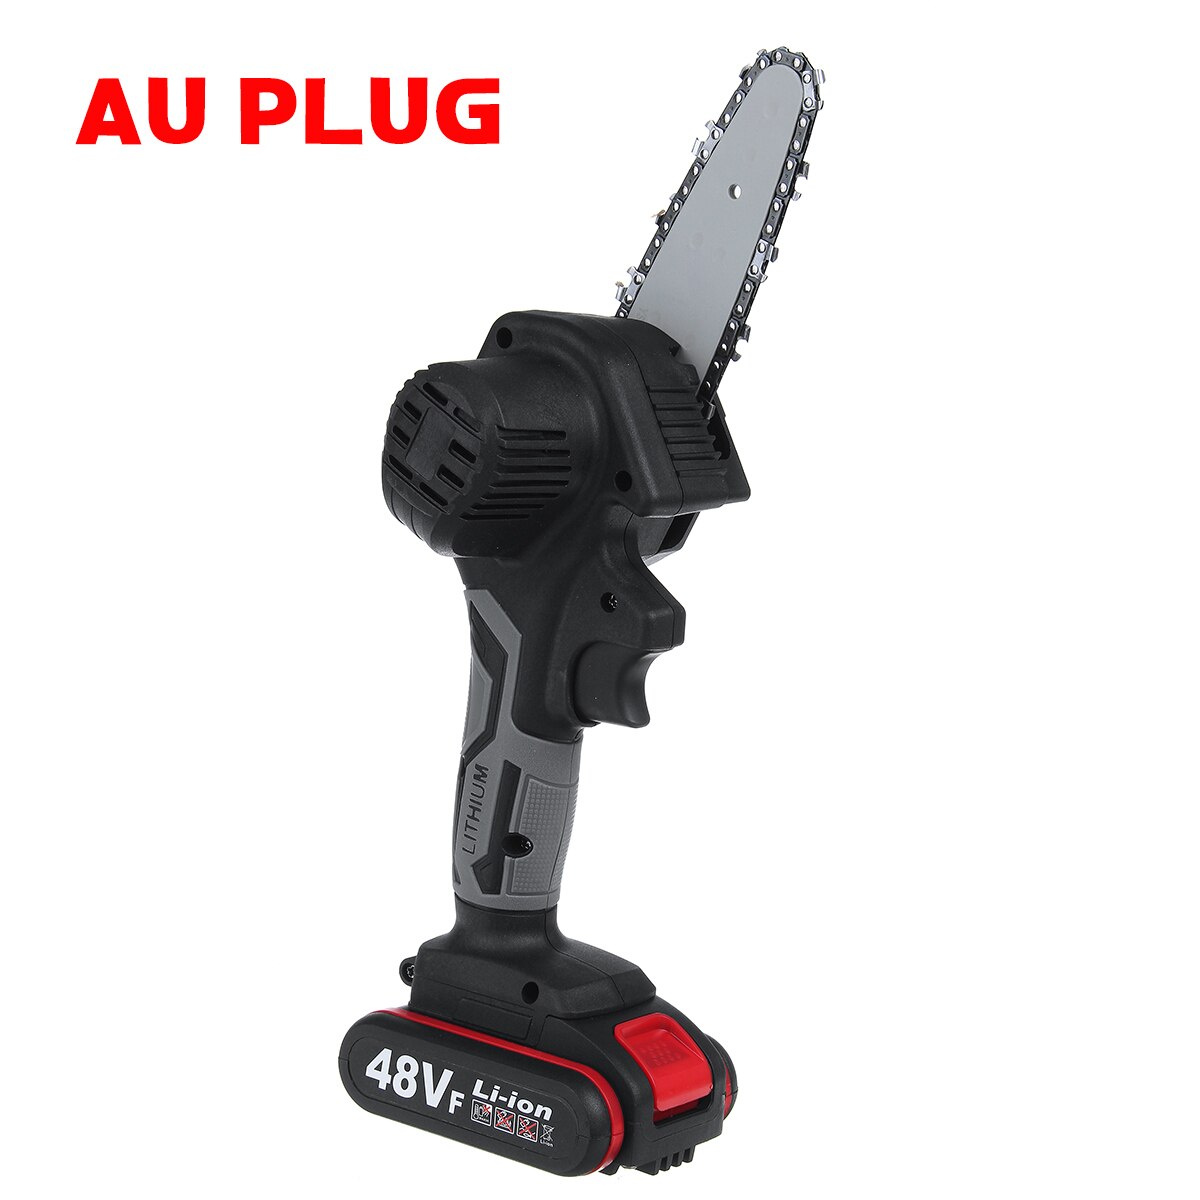 48V Cordless Electric Chain Saw 4inch Portable Electric Saw Woodworking Cutting DIY Tool Electric Pruning Saw With 1 Battery: AU plug